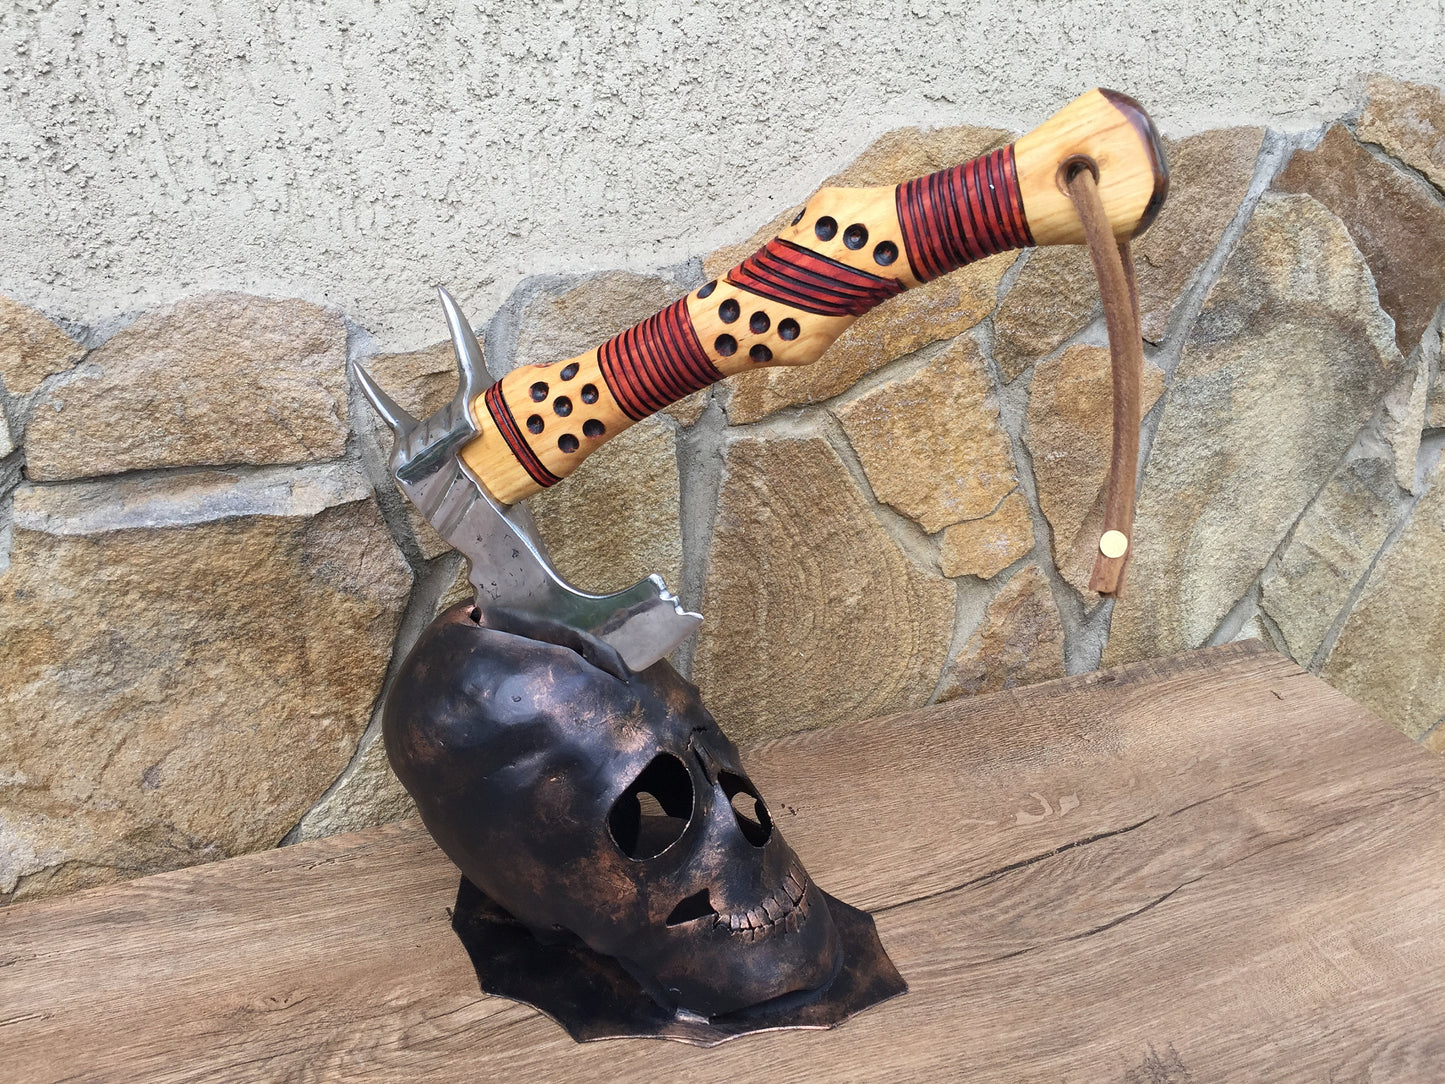 Axe holder, axe stand, viking axe, Leviathan axe, mens gifts, God of War axe, iron skull, medieval axe, tomahawk, gift for him,gifts for men